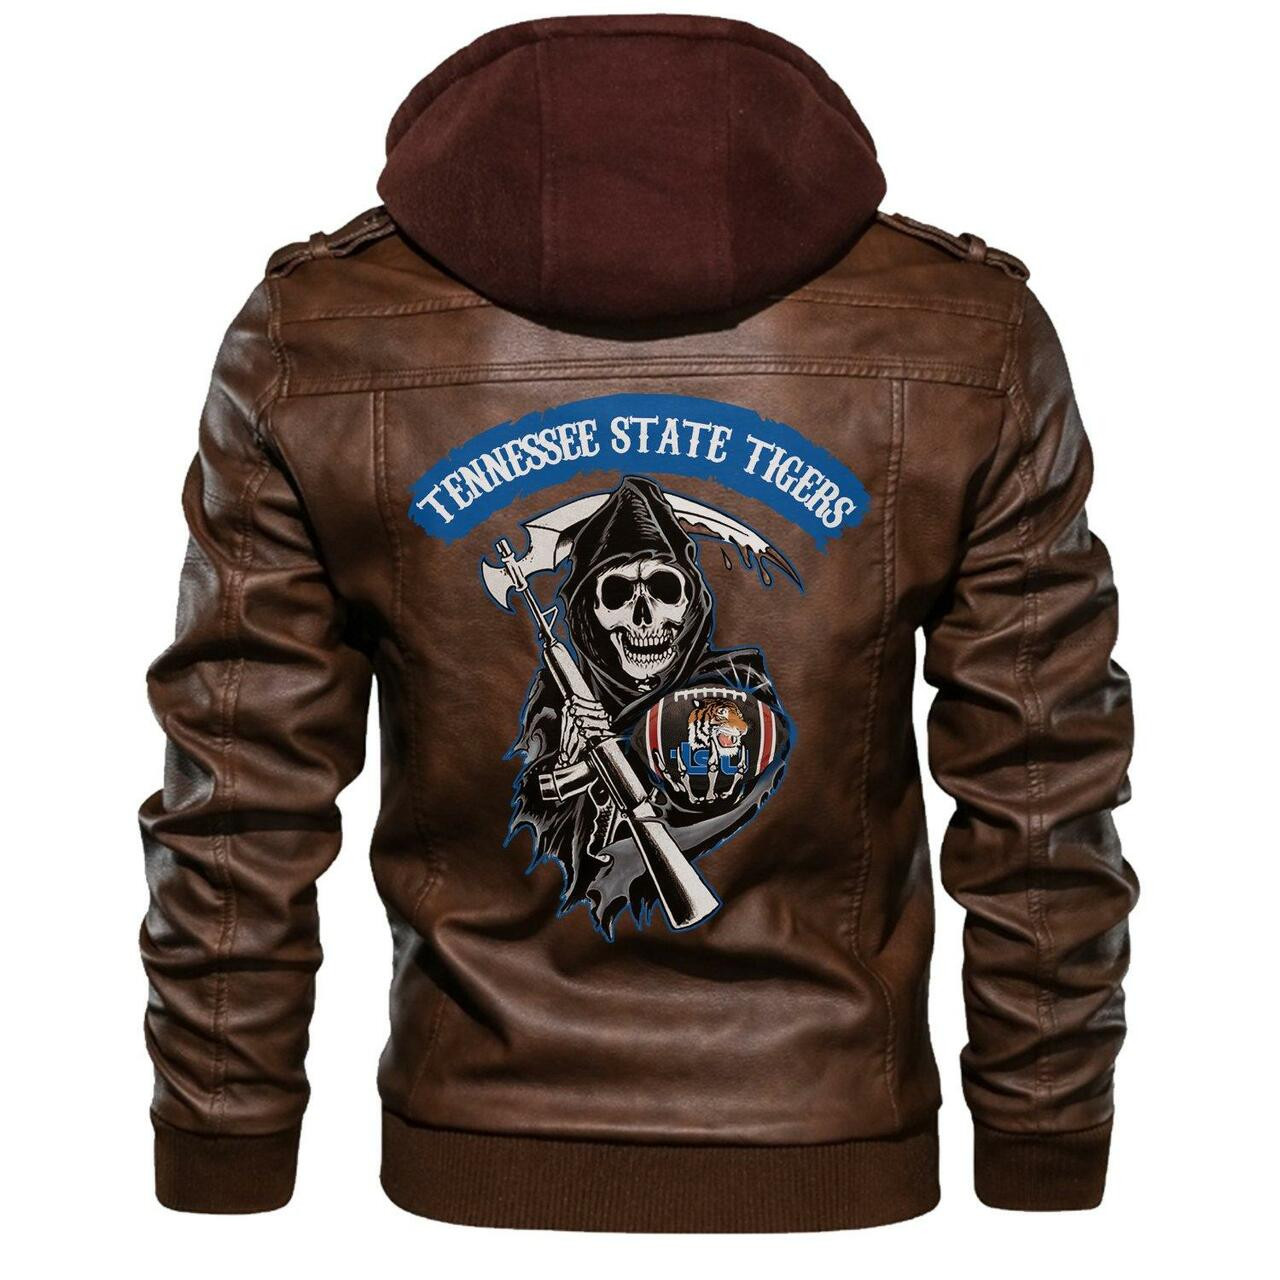 Check out and find the right leather jacket below 199